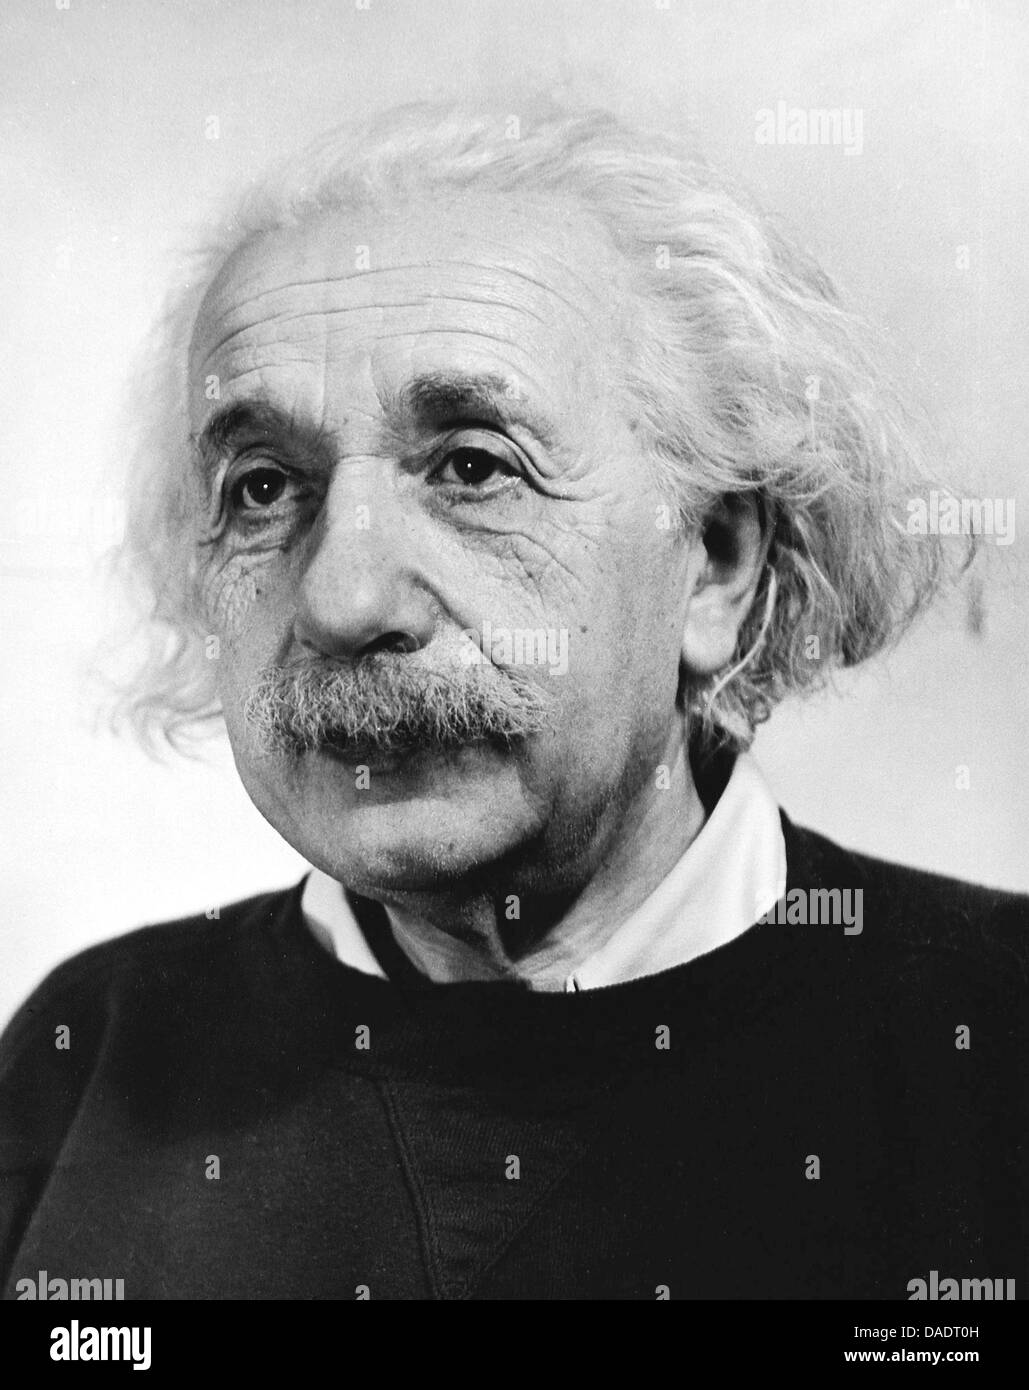 Albert Einstein in 1946. Portrait by photographer Fred Stein (1909-1967) who emigrated 1933 from Nazi Germany to France and finally to the USA. Stock Photo